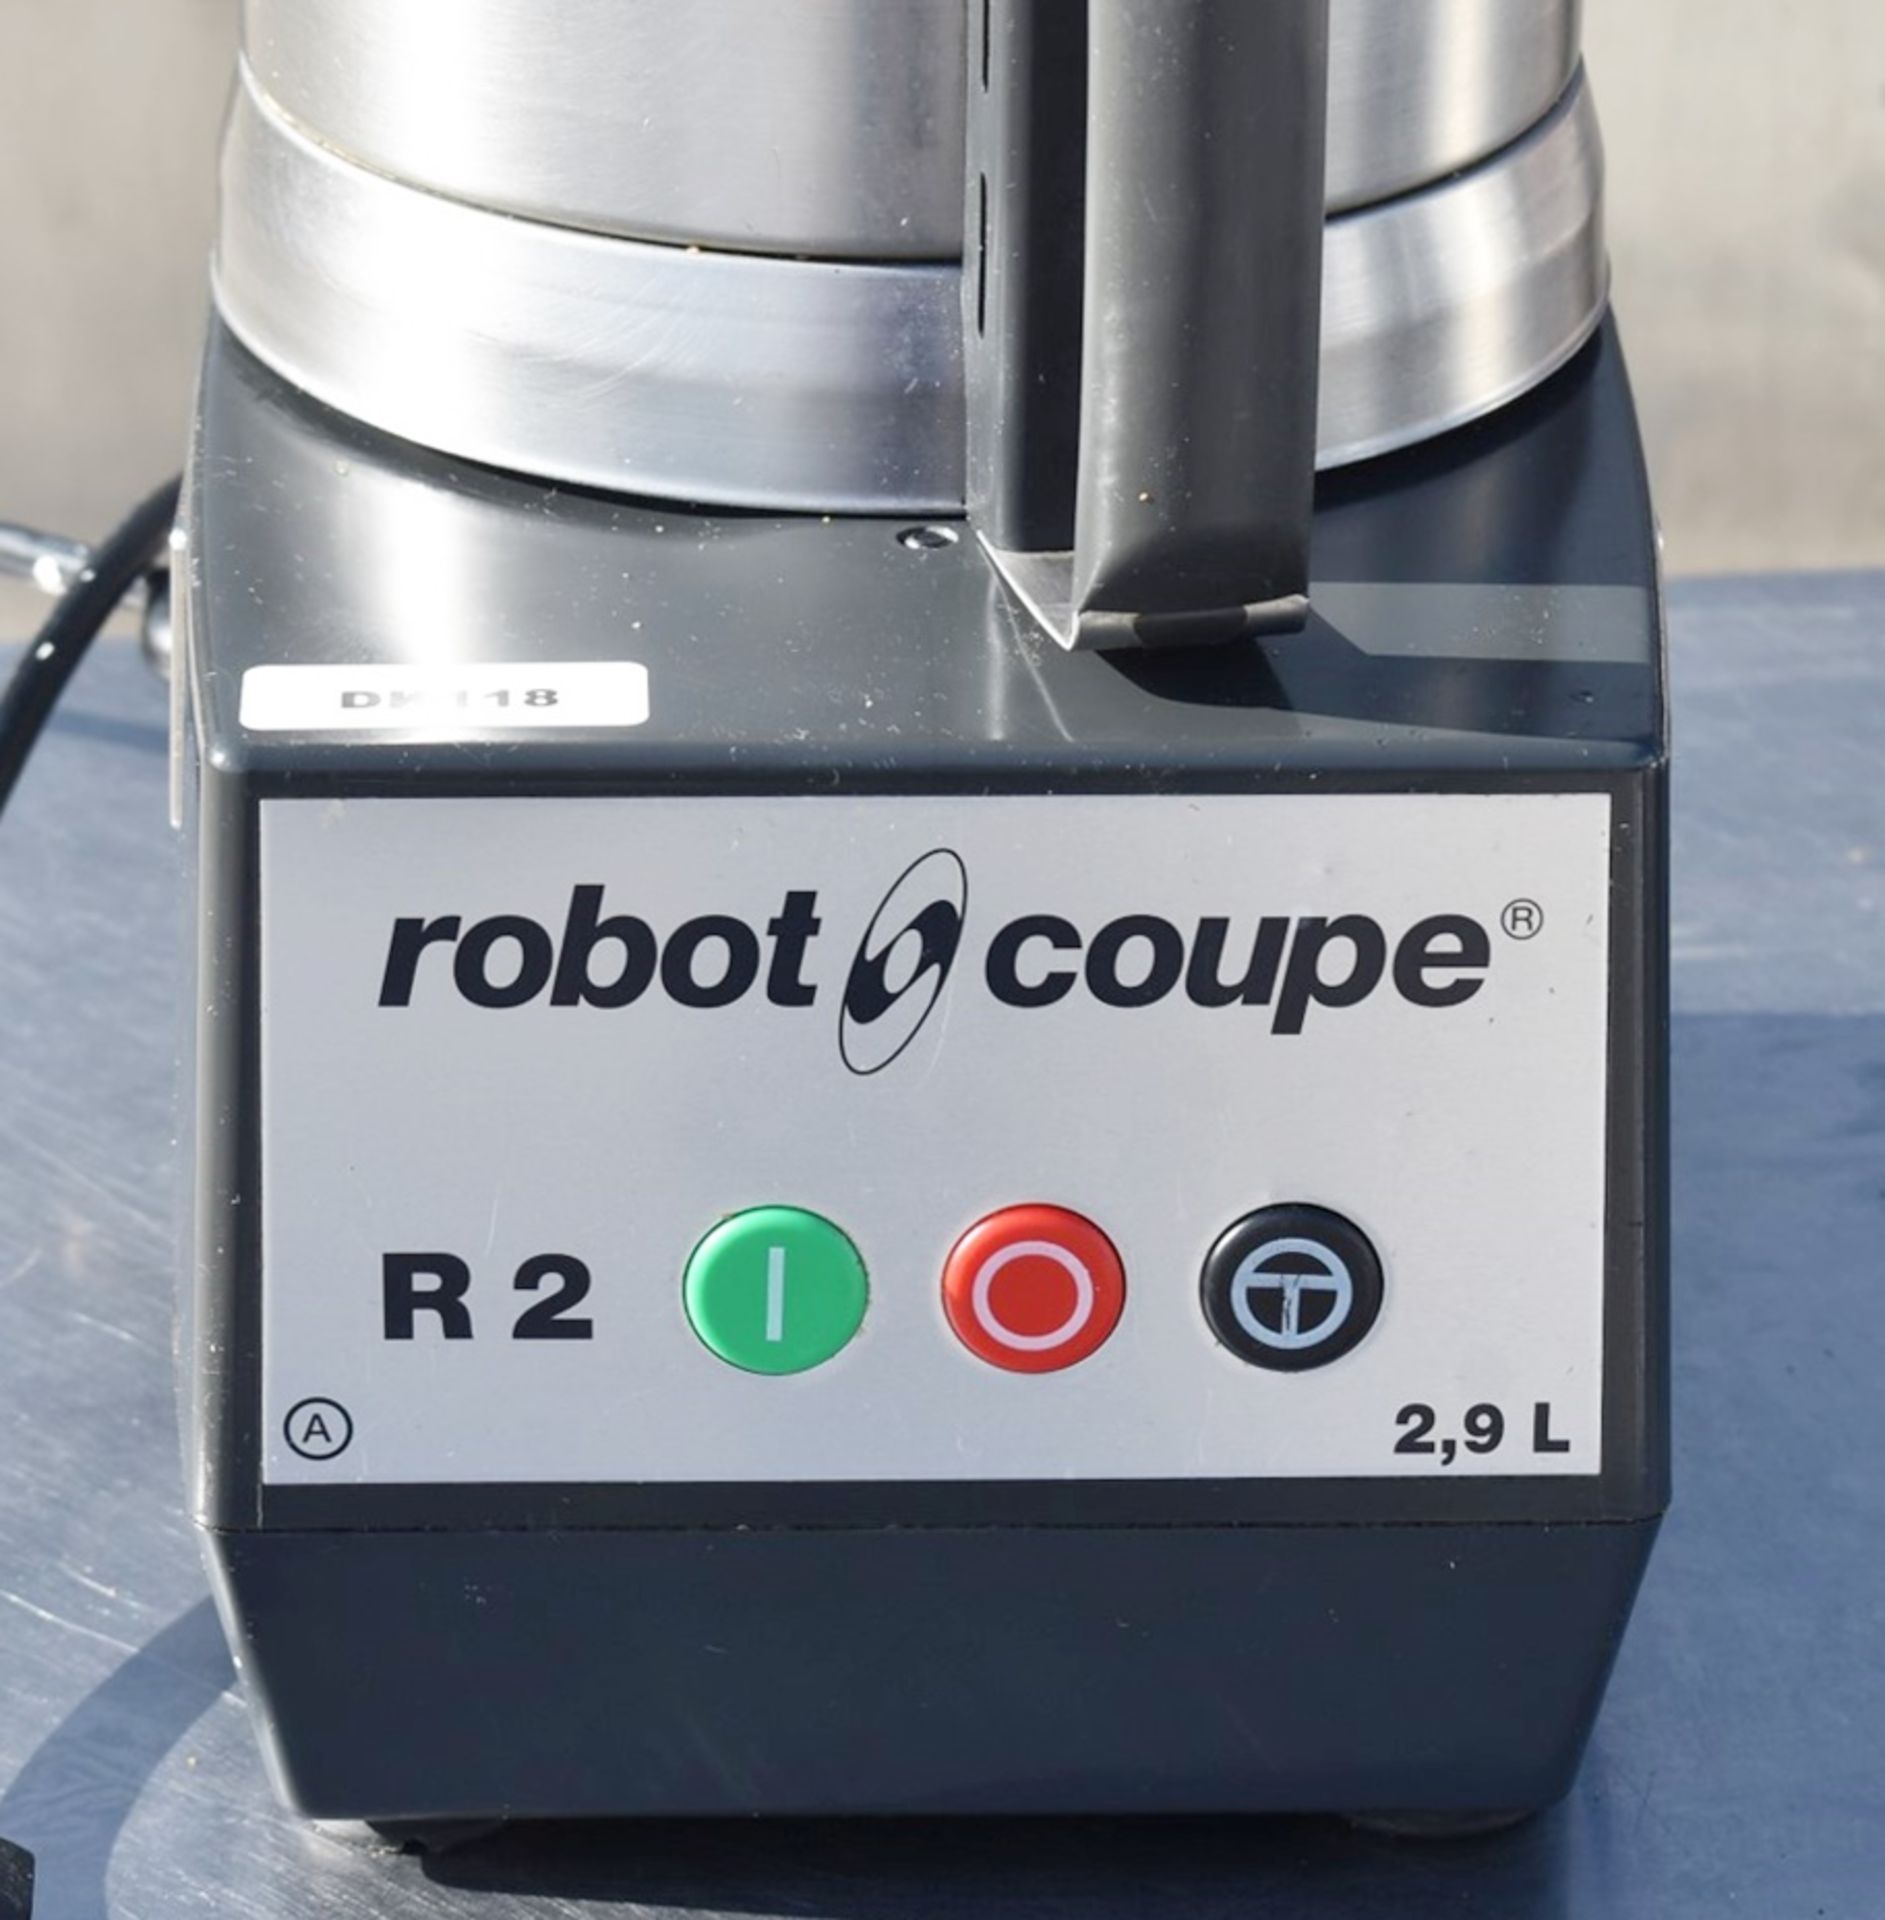 1 x Robot Coupe R2 Heavy Duty Cutter Blender - Recently Removed From a Dark Kitchen Environment - Image 3 of 9